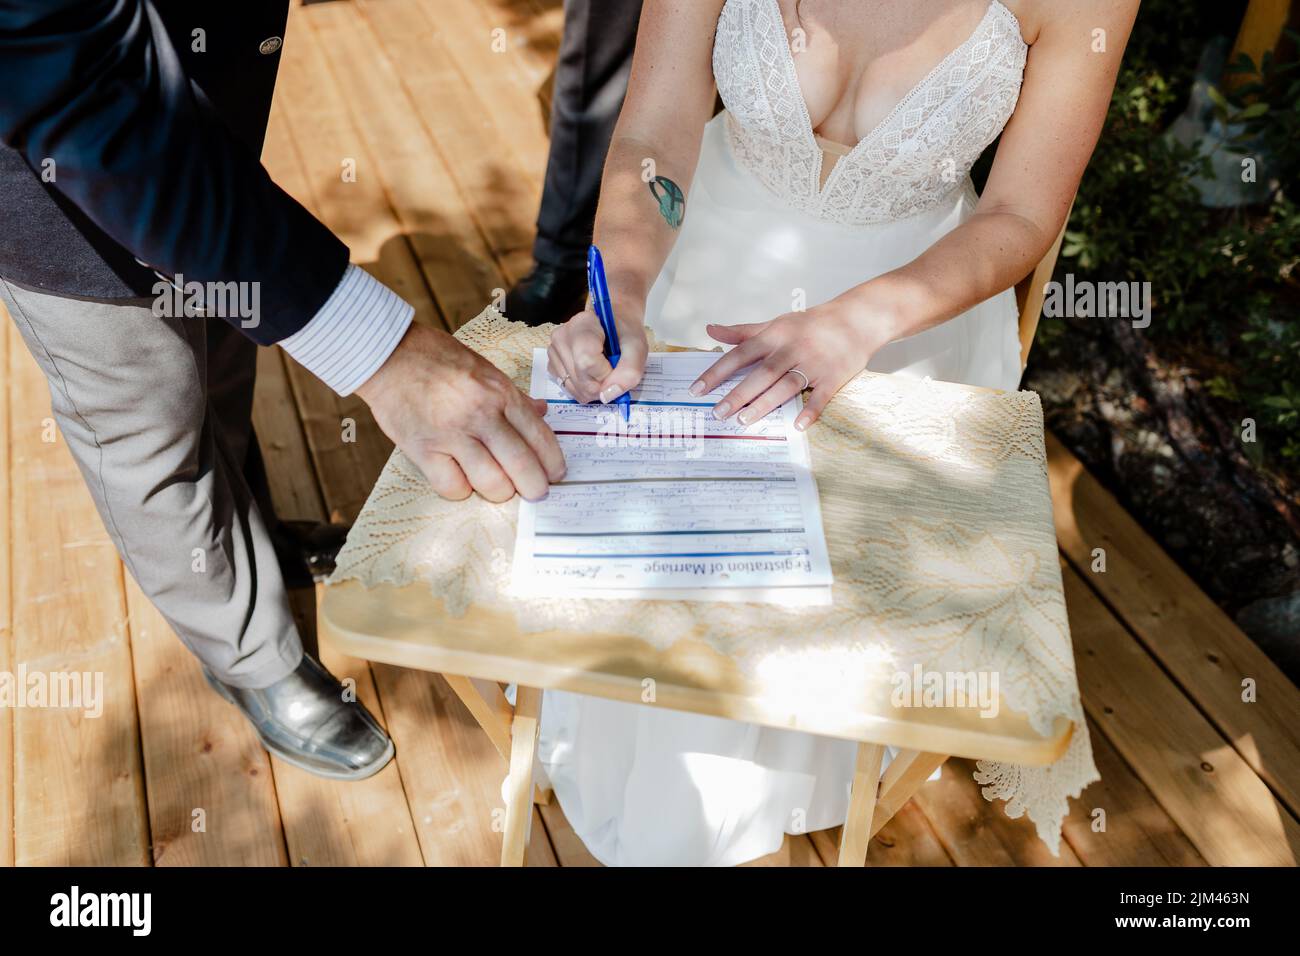 https://c8.alamy.com/comp/2JM463N/a-closeup-shot-of-a-bride-signing-a-wedding-contract-papers-on-a-wooden-table-on-a-sunny-day-2JM463N.jpg